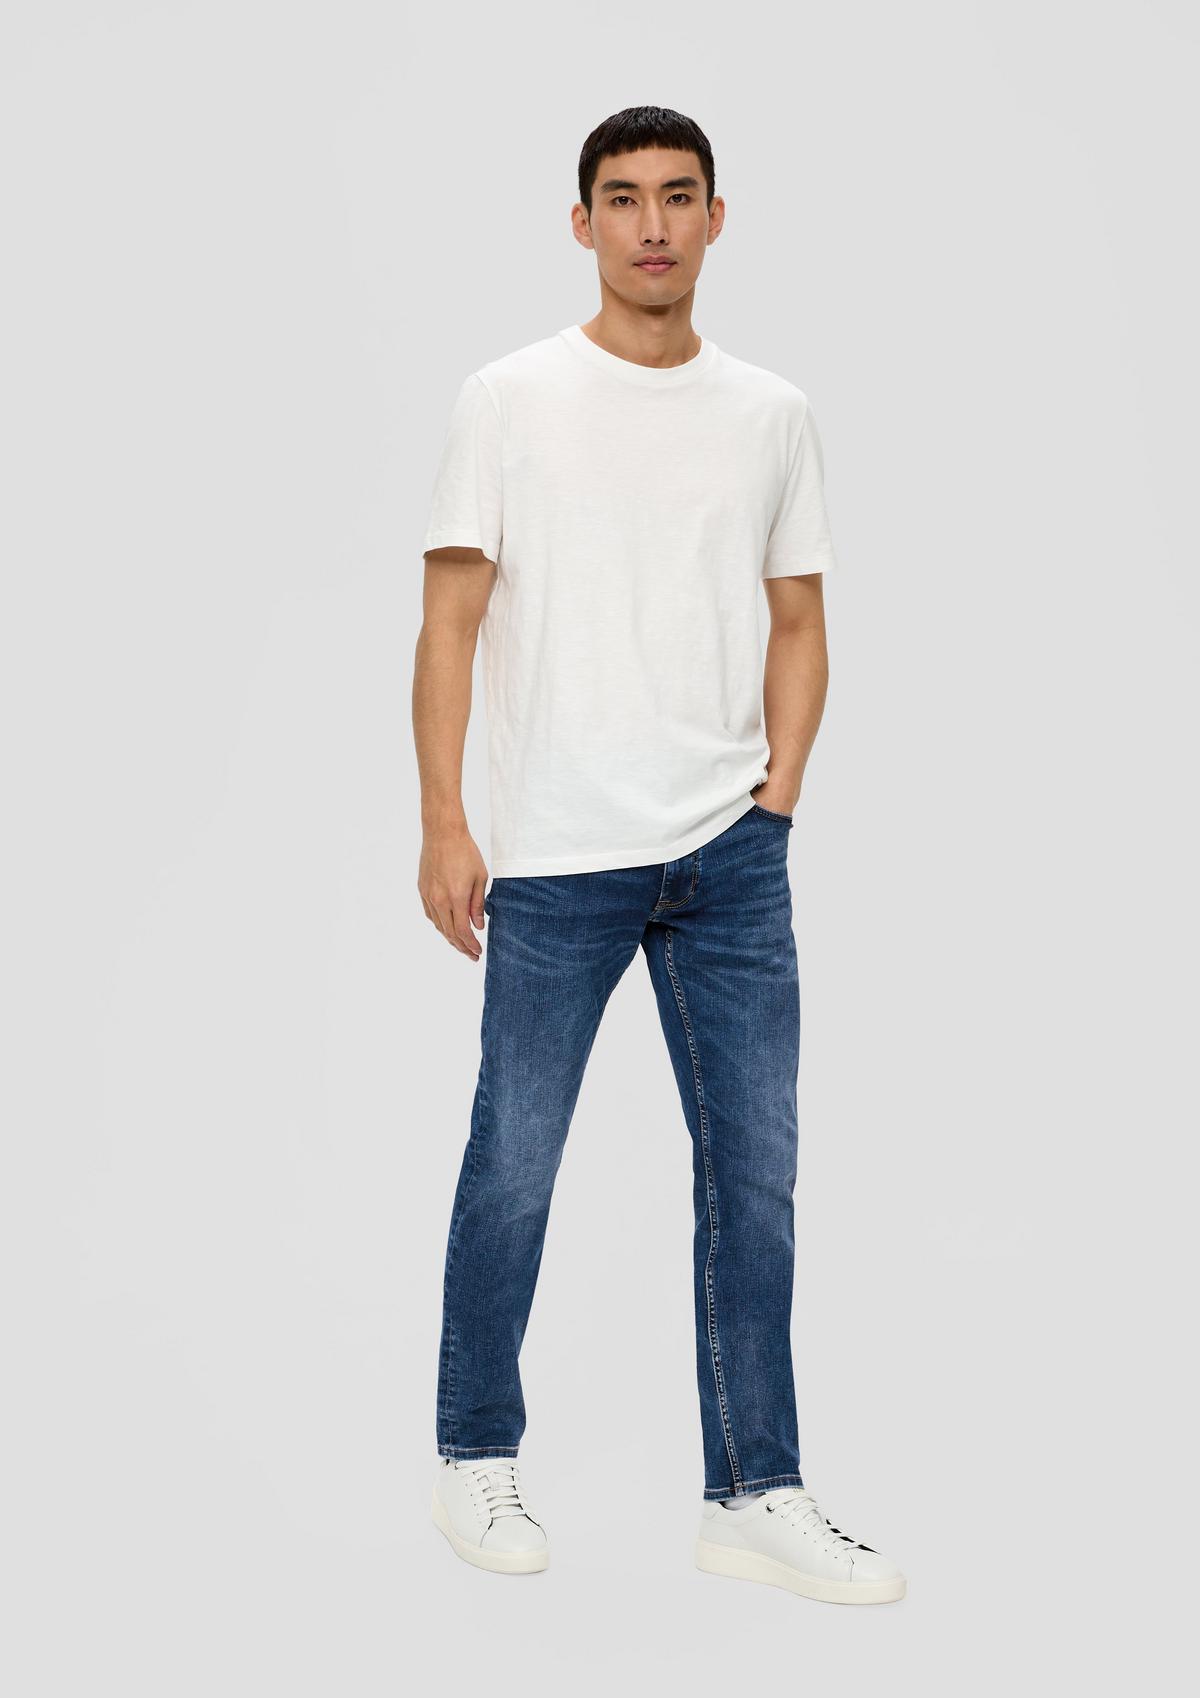 Keith jeans / slim fit / mid rise / straight leg